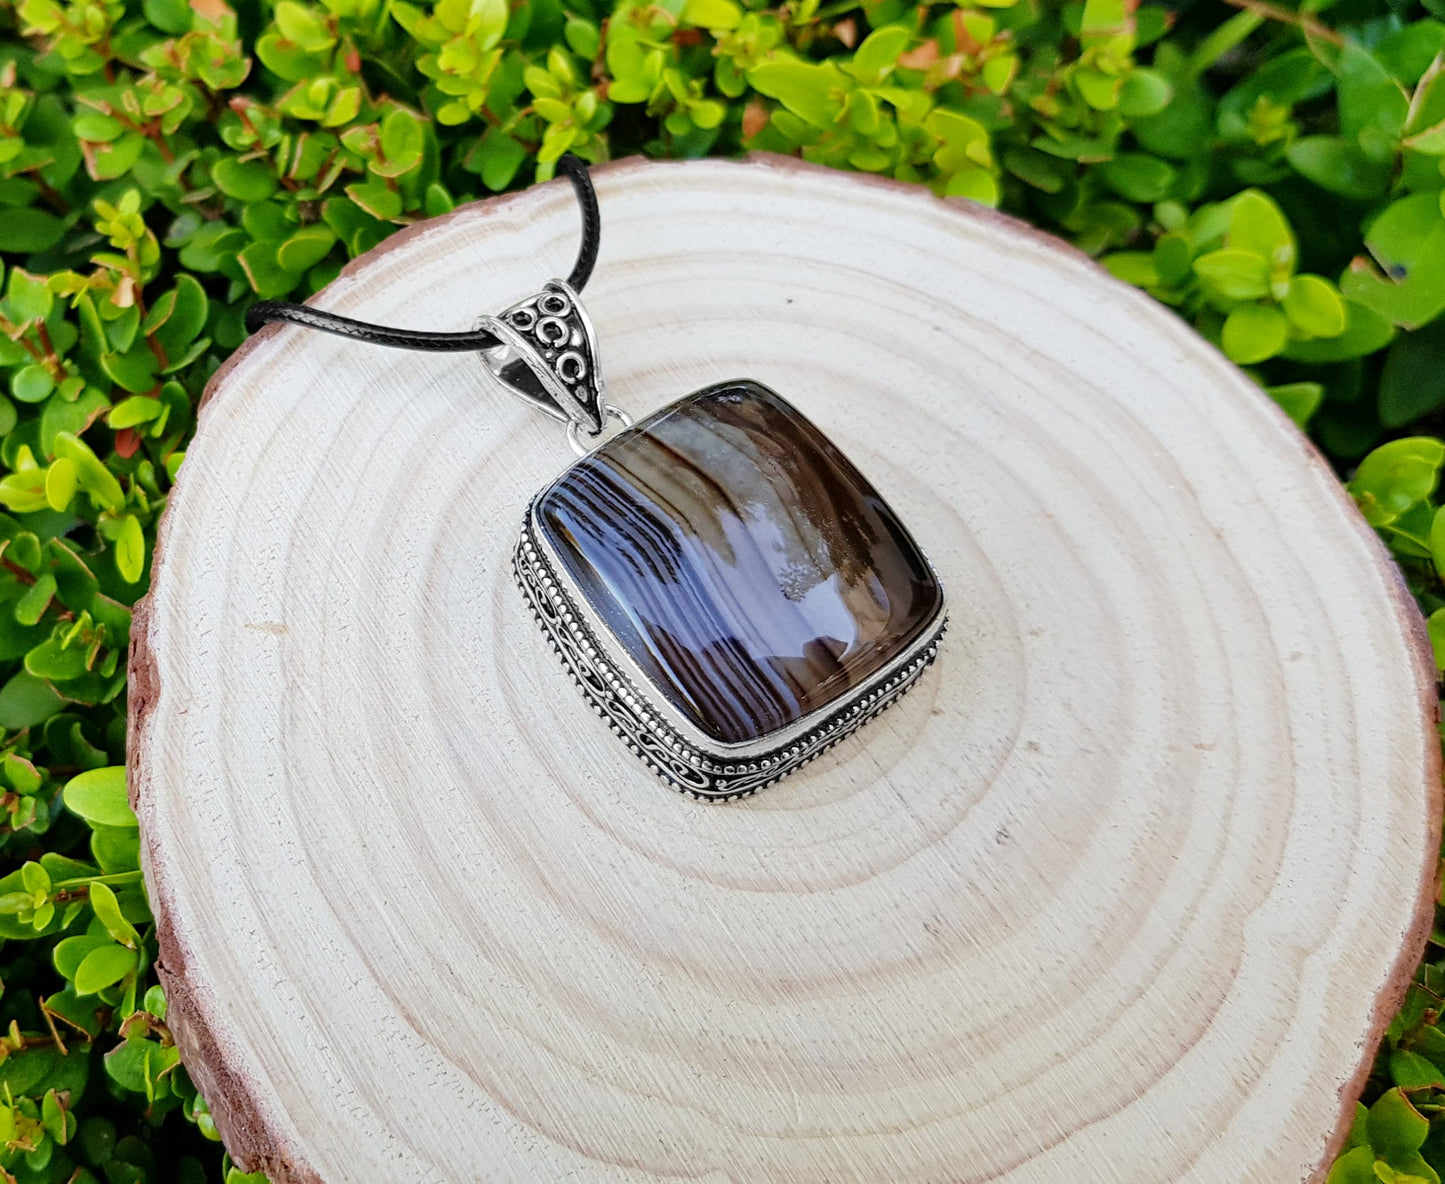 Botswana Agate Pendant In Sterling Silver Boho Crystal Necklace Unique Gift Unisex Necklace